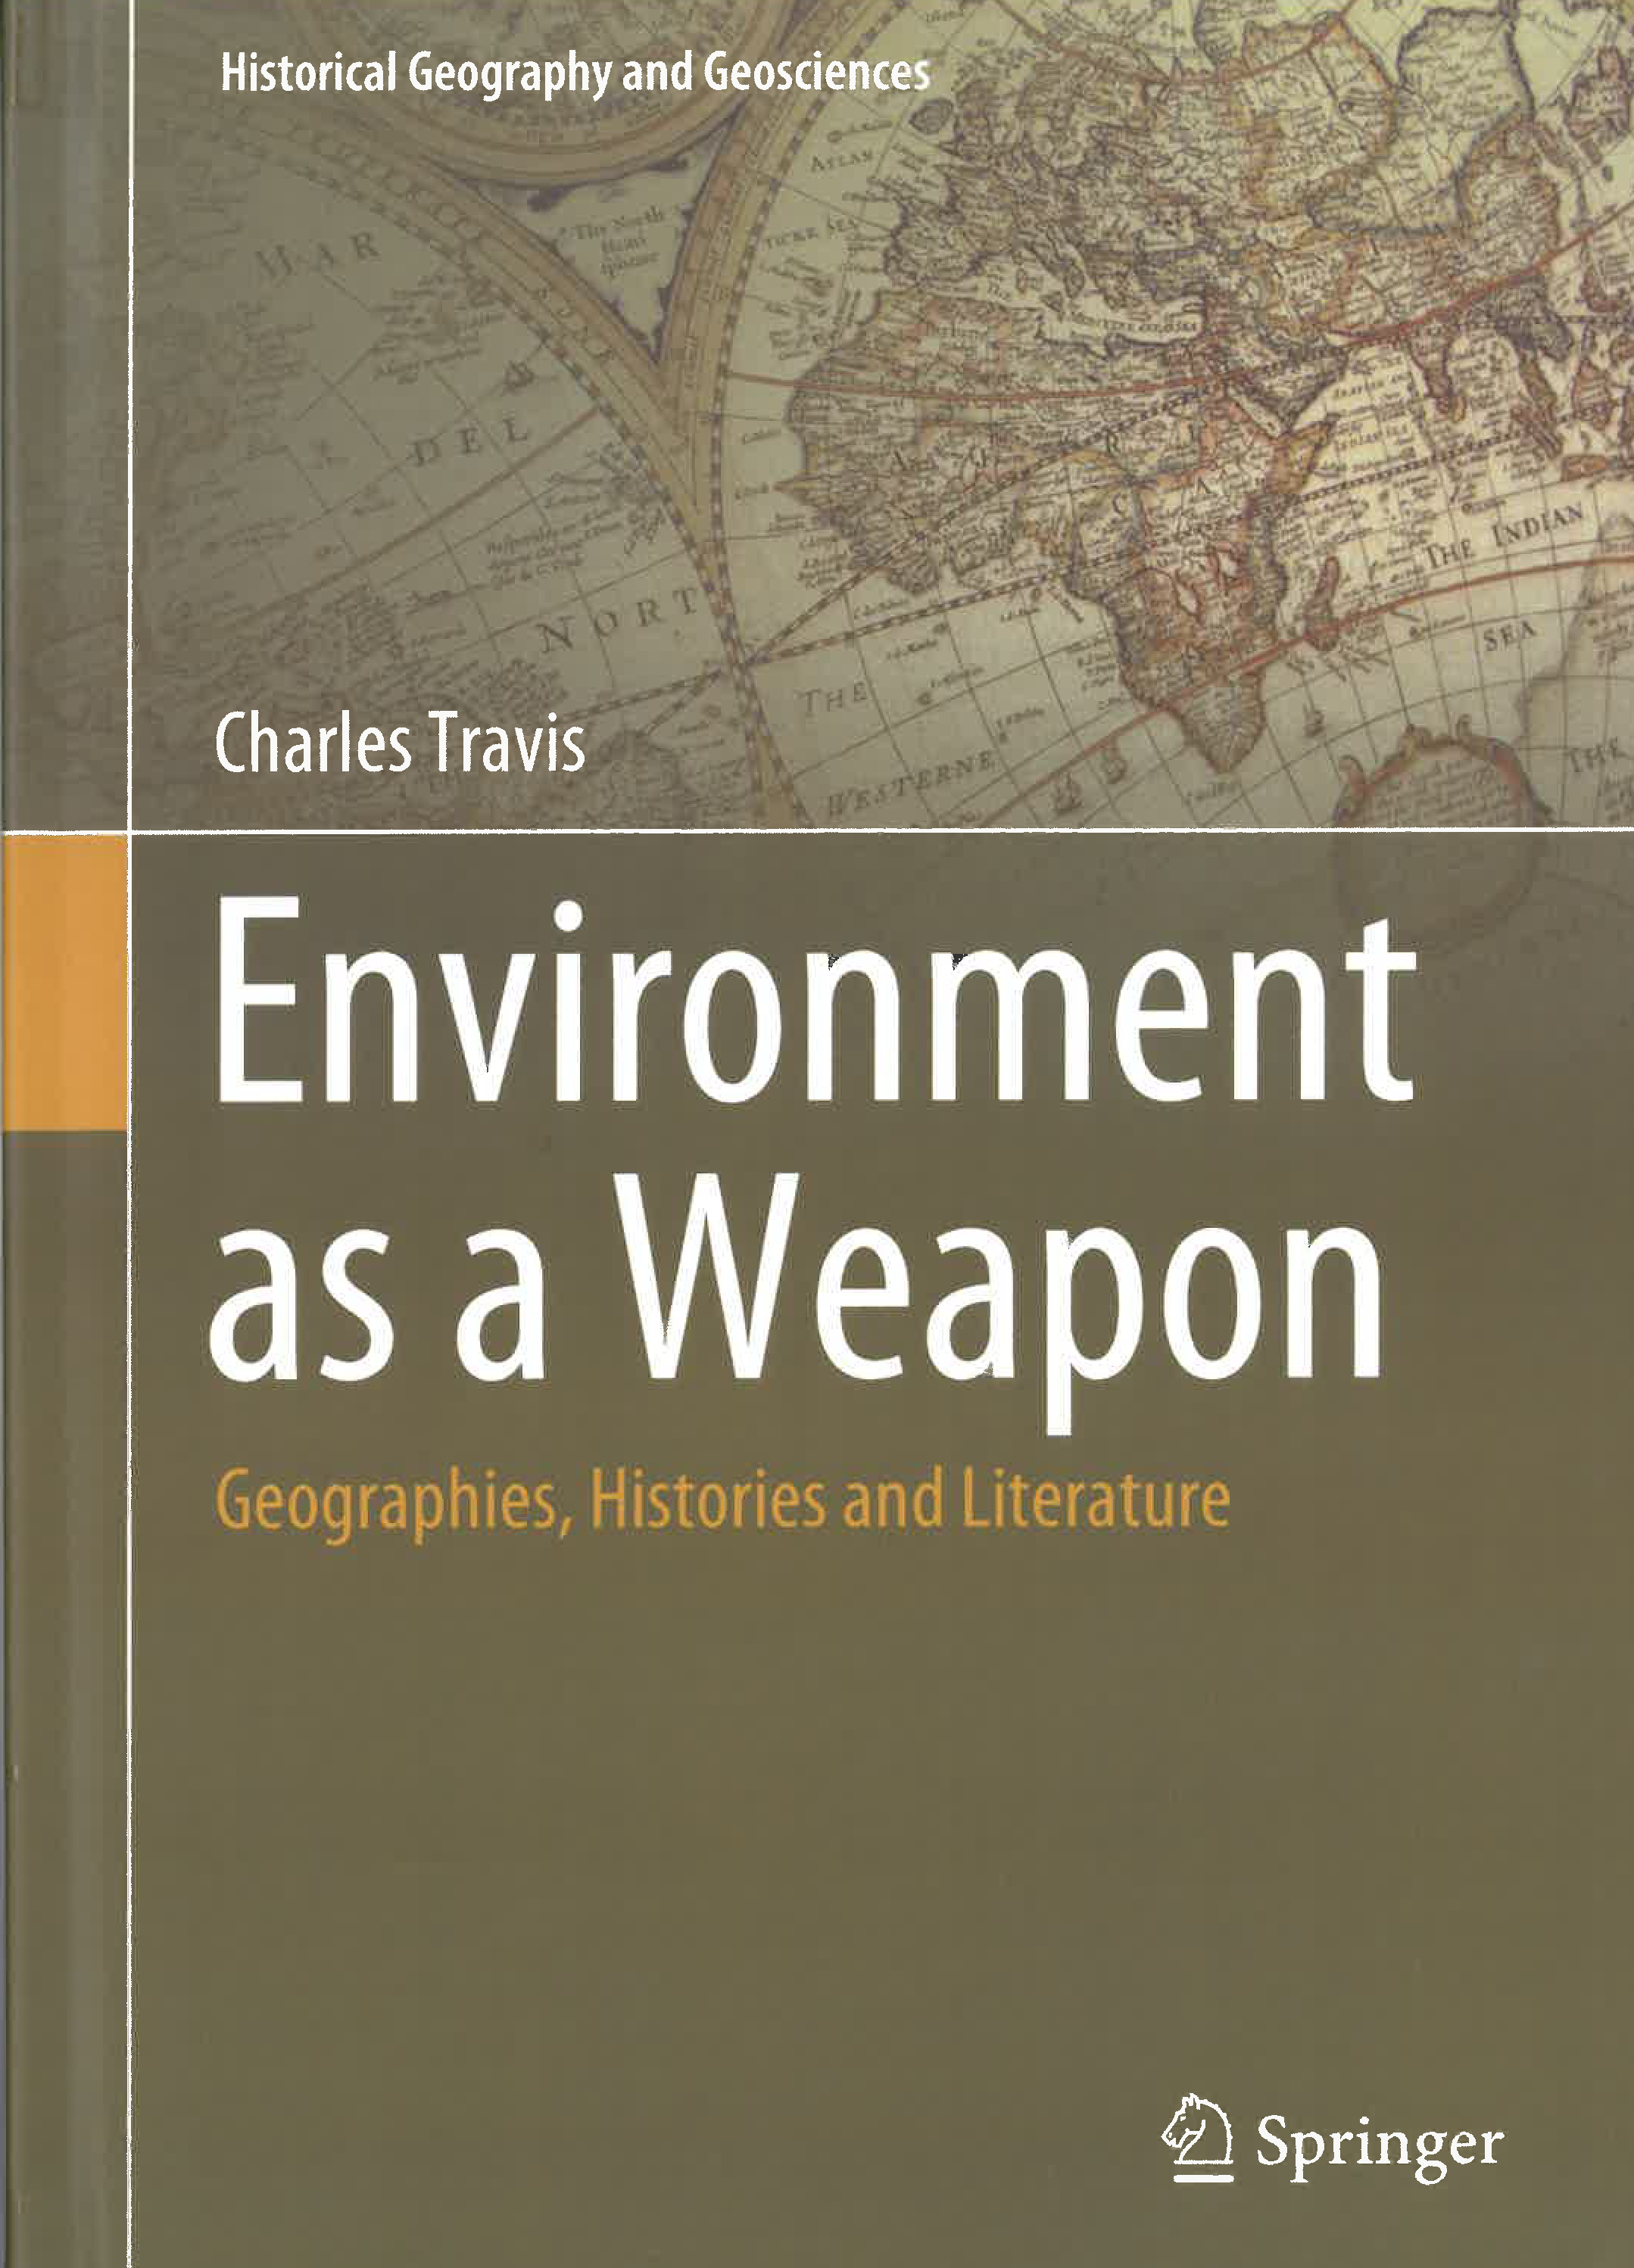 Book cover of Environment as a Weapon by Charles Travis